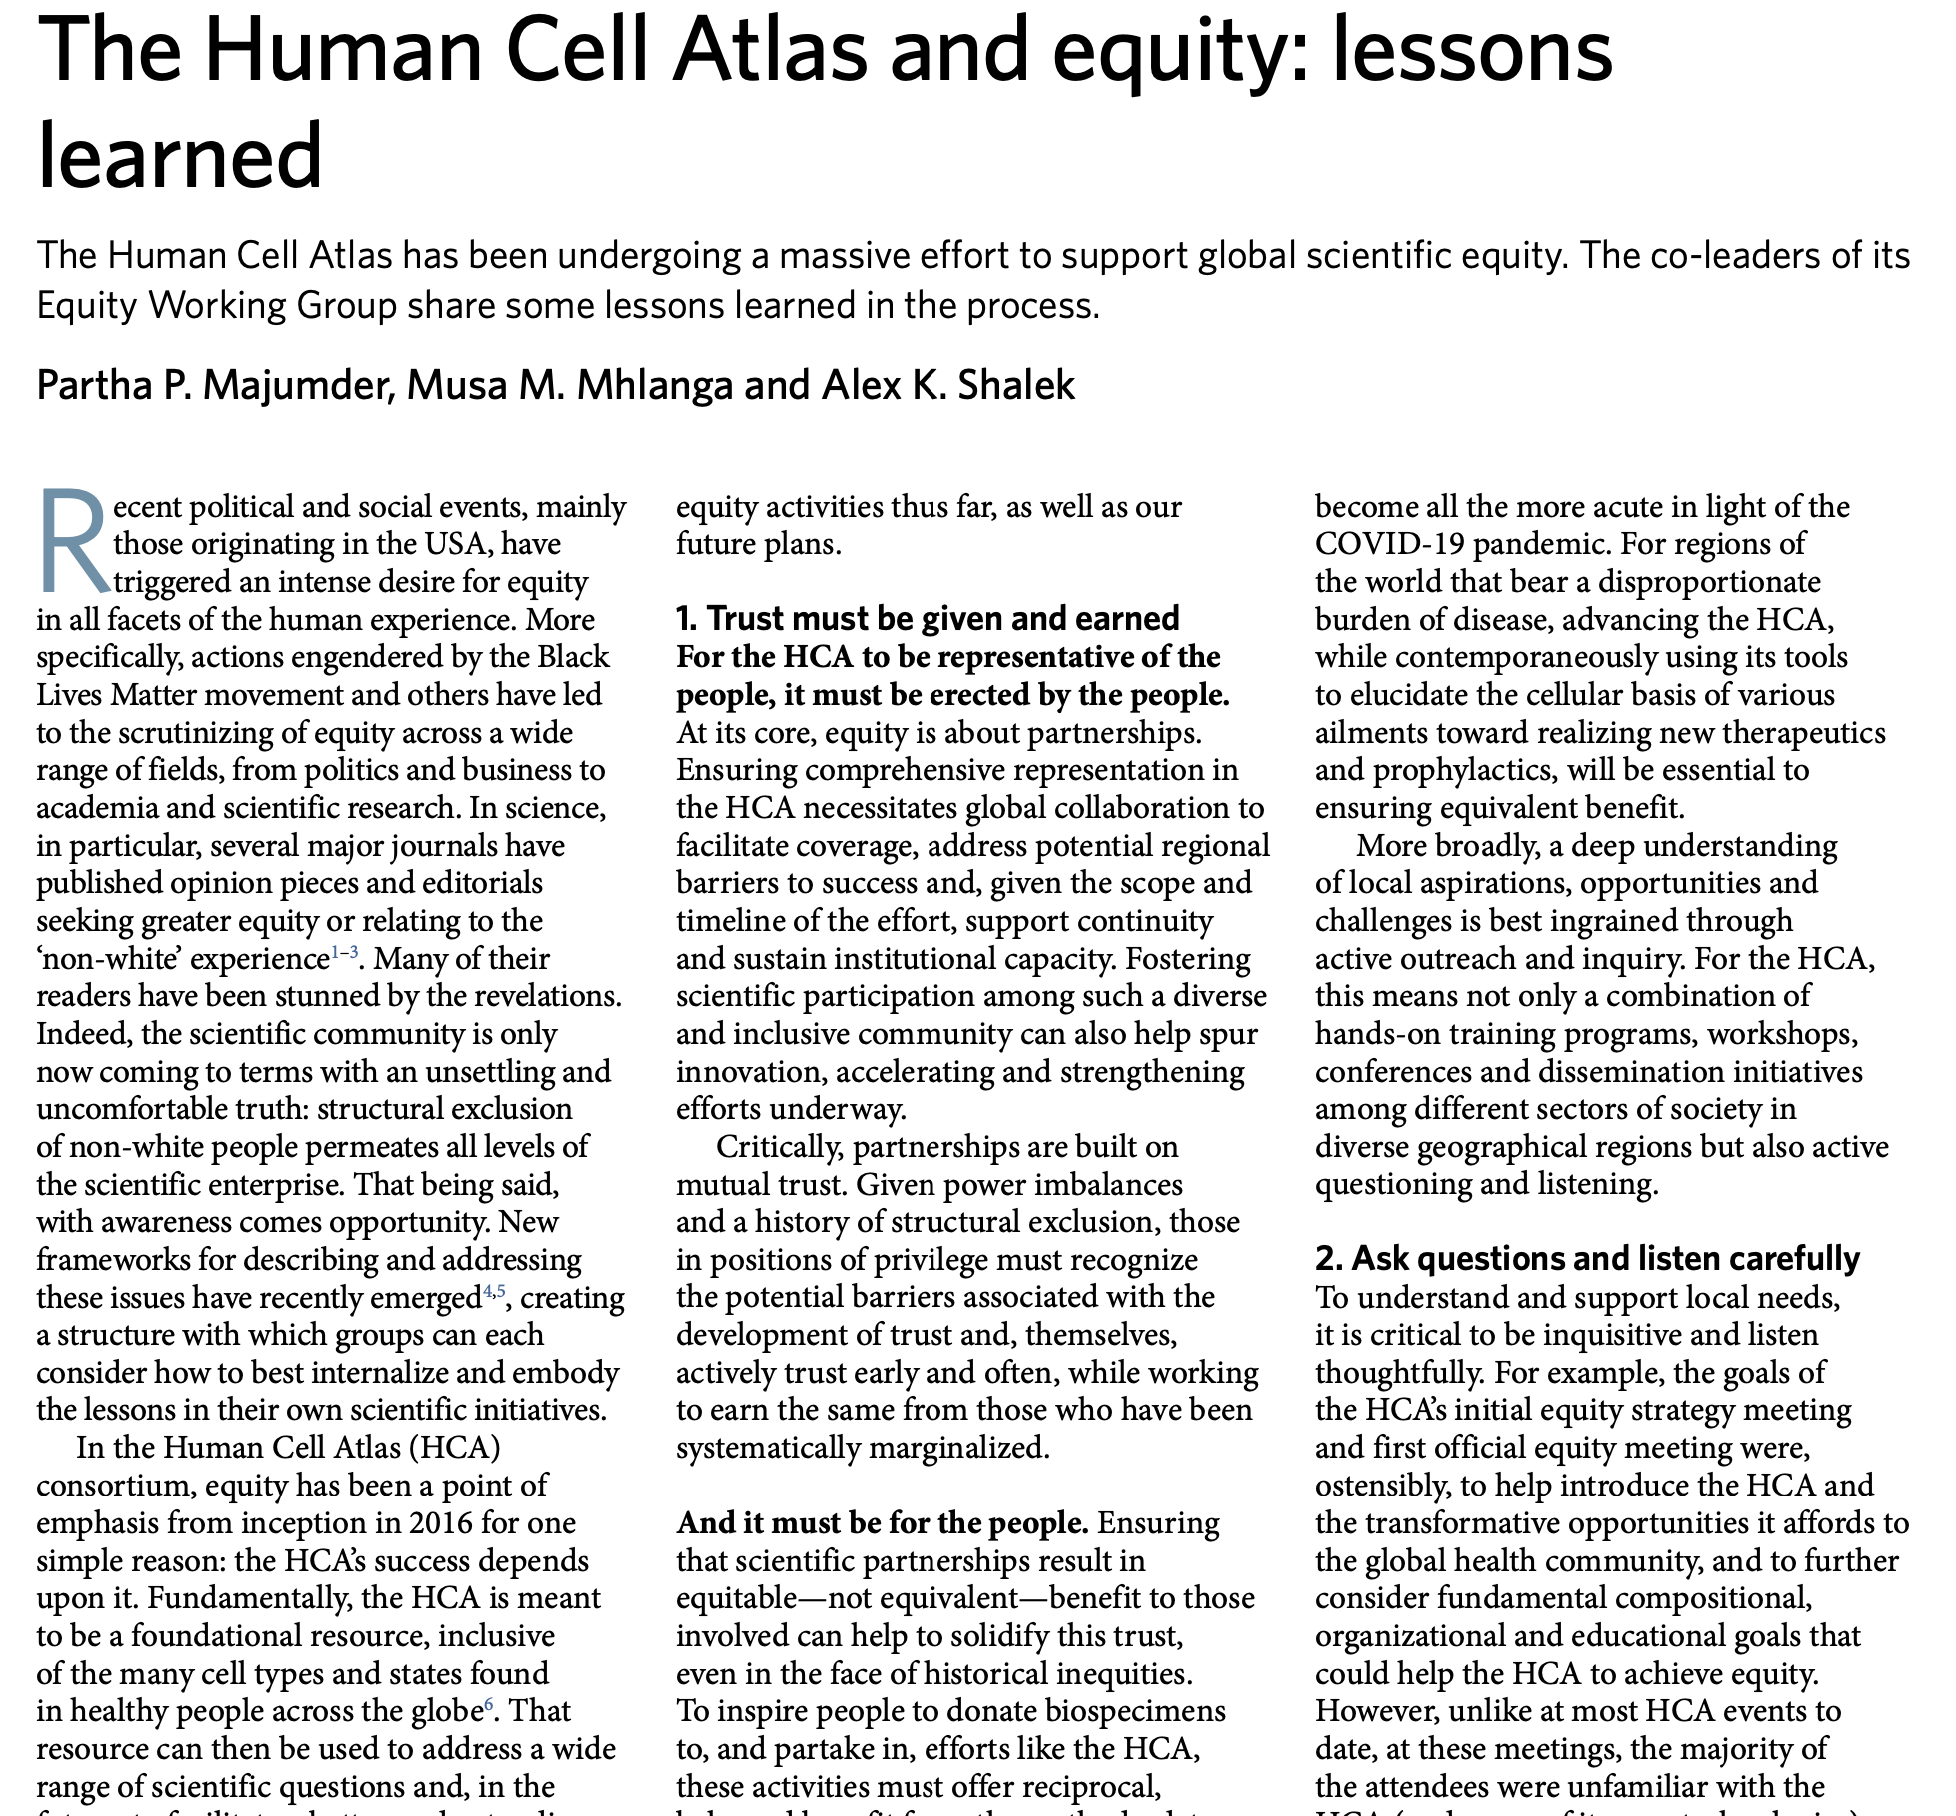 The Human Cell Atlas and equity: lessons learned